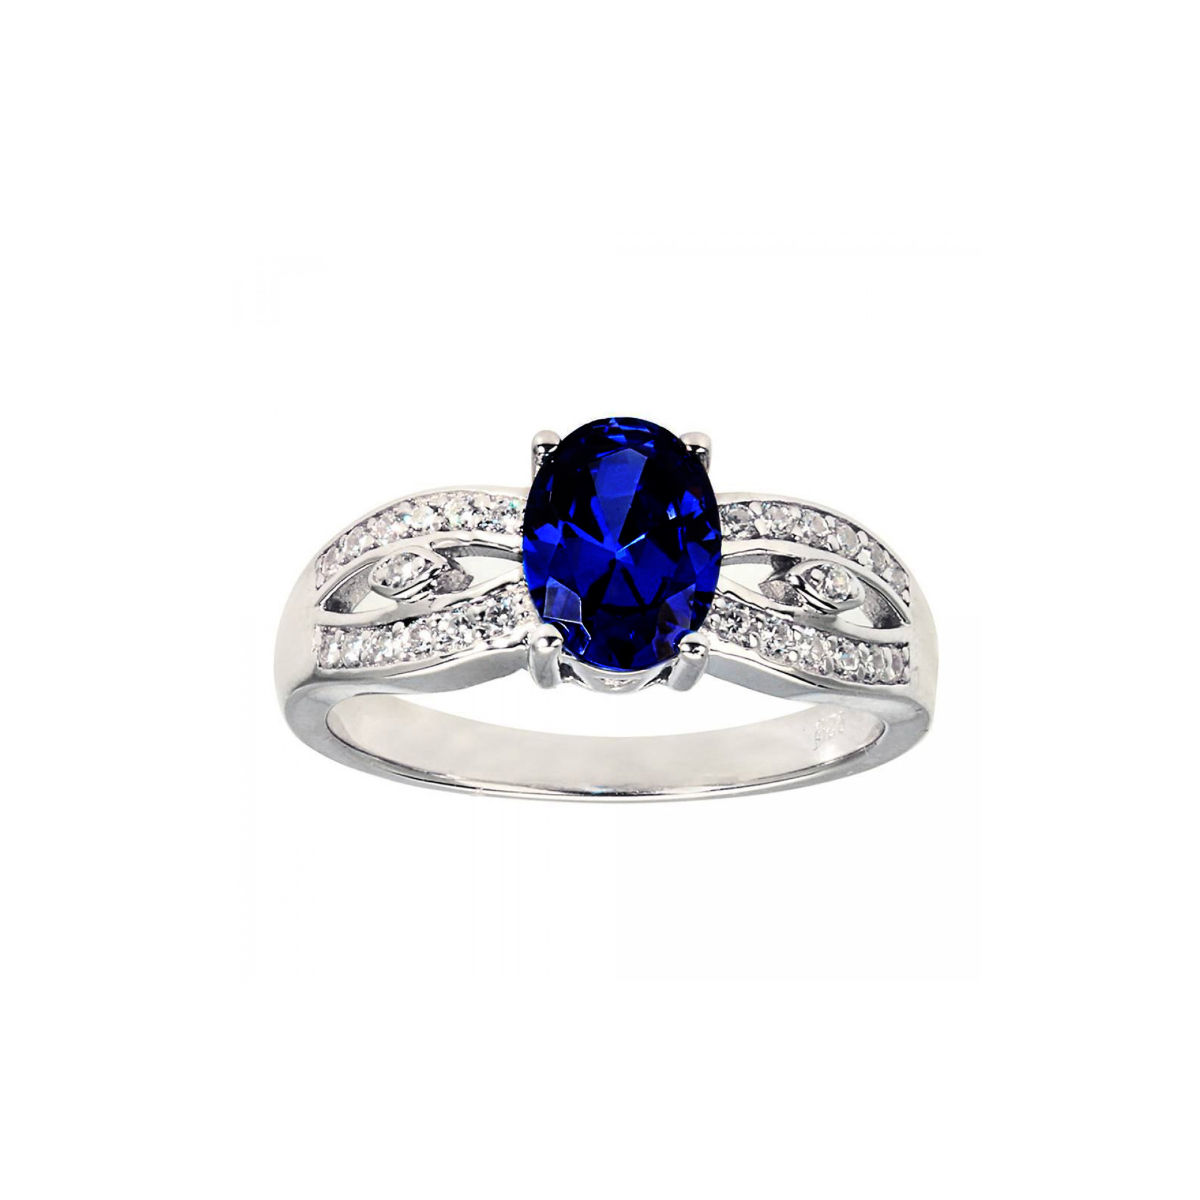 Blue Sapphire Ring | 254CT Diamond | Solid 14KW Ring